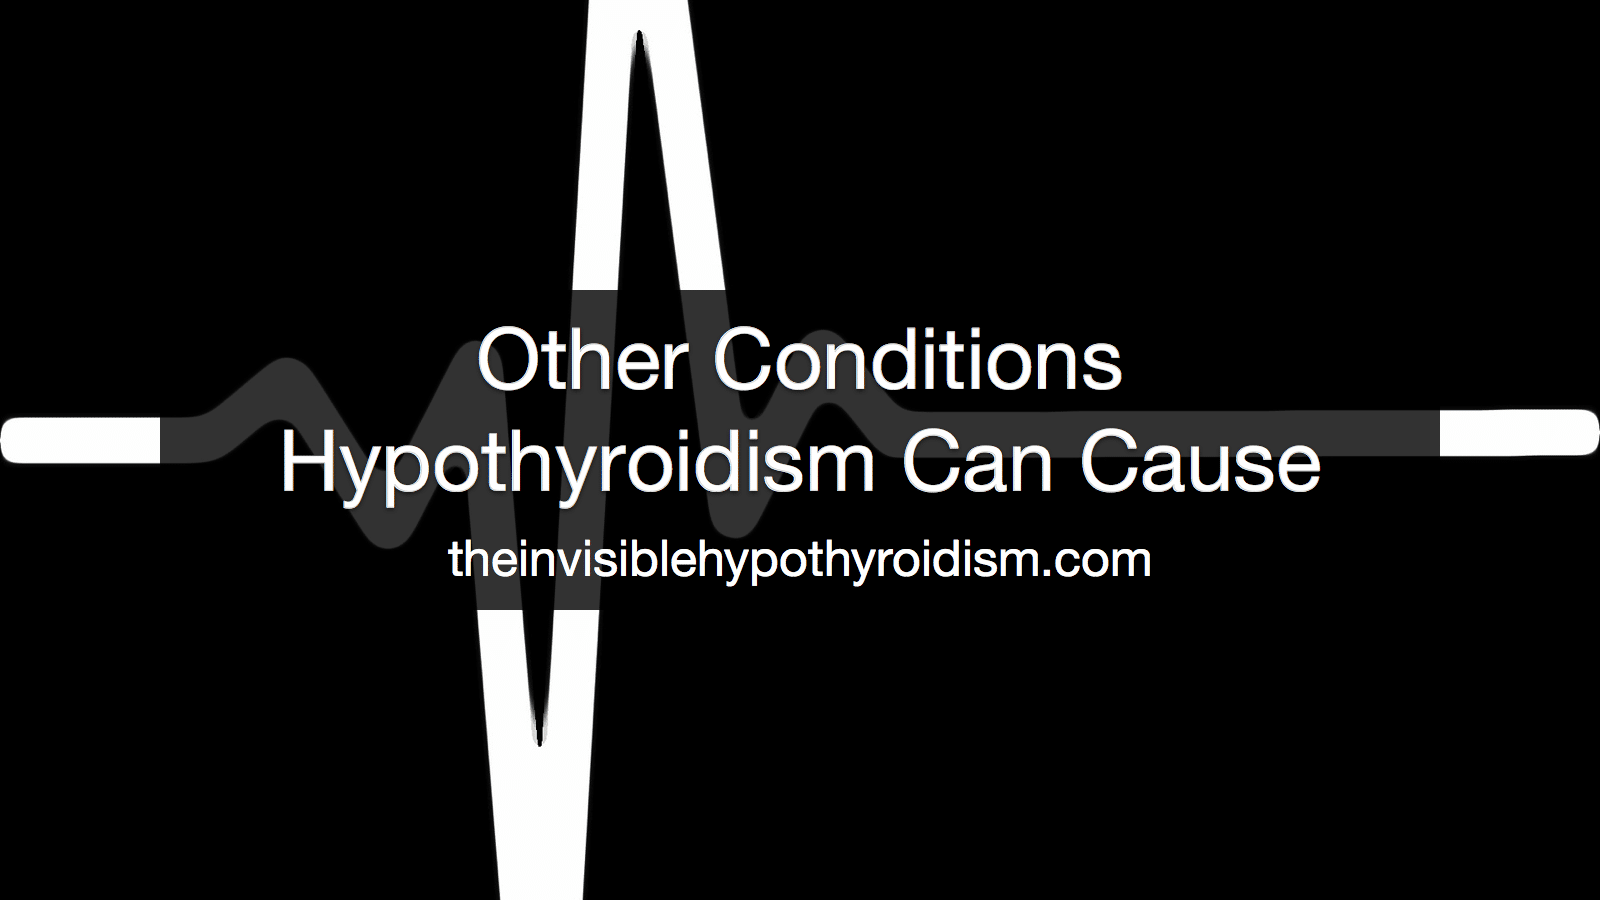 Other Conditions Hypothyroidism Can Cause